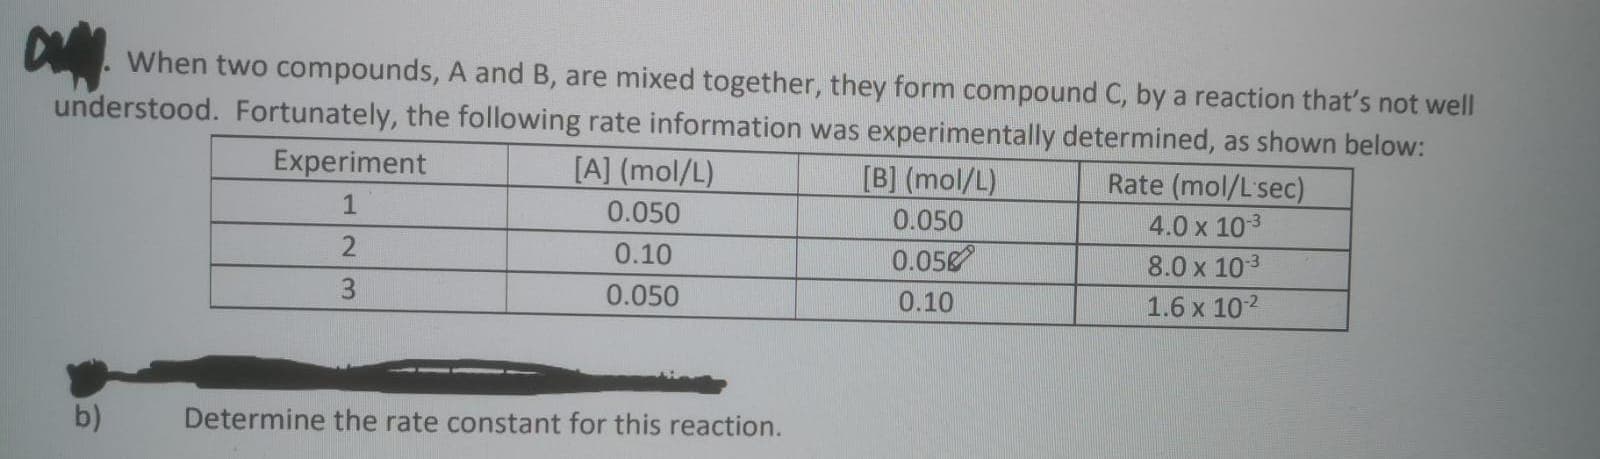 When two compounds, A and B, are mixed together, they form compound C, by a reaction that's not well
understood. Fortunately, the following rate information was experimentally determined, as shown below:
Experiment
[A] (mol/L)
[B] (mol/L)
Rate (mol/L'sec)
1
0.050
0.050
4.0 x 103
0.10
0.058
8.0 x 103
3
0.050
0.10
1.6 x 102
b)
Determine the rate constant for this reaction.
